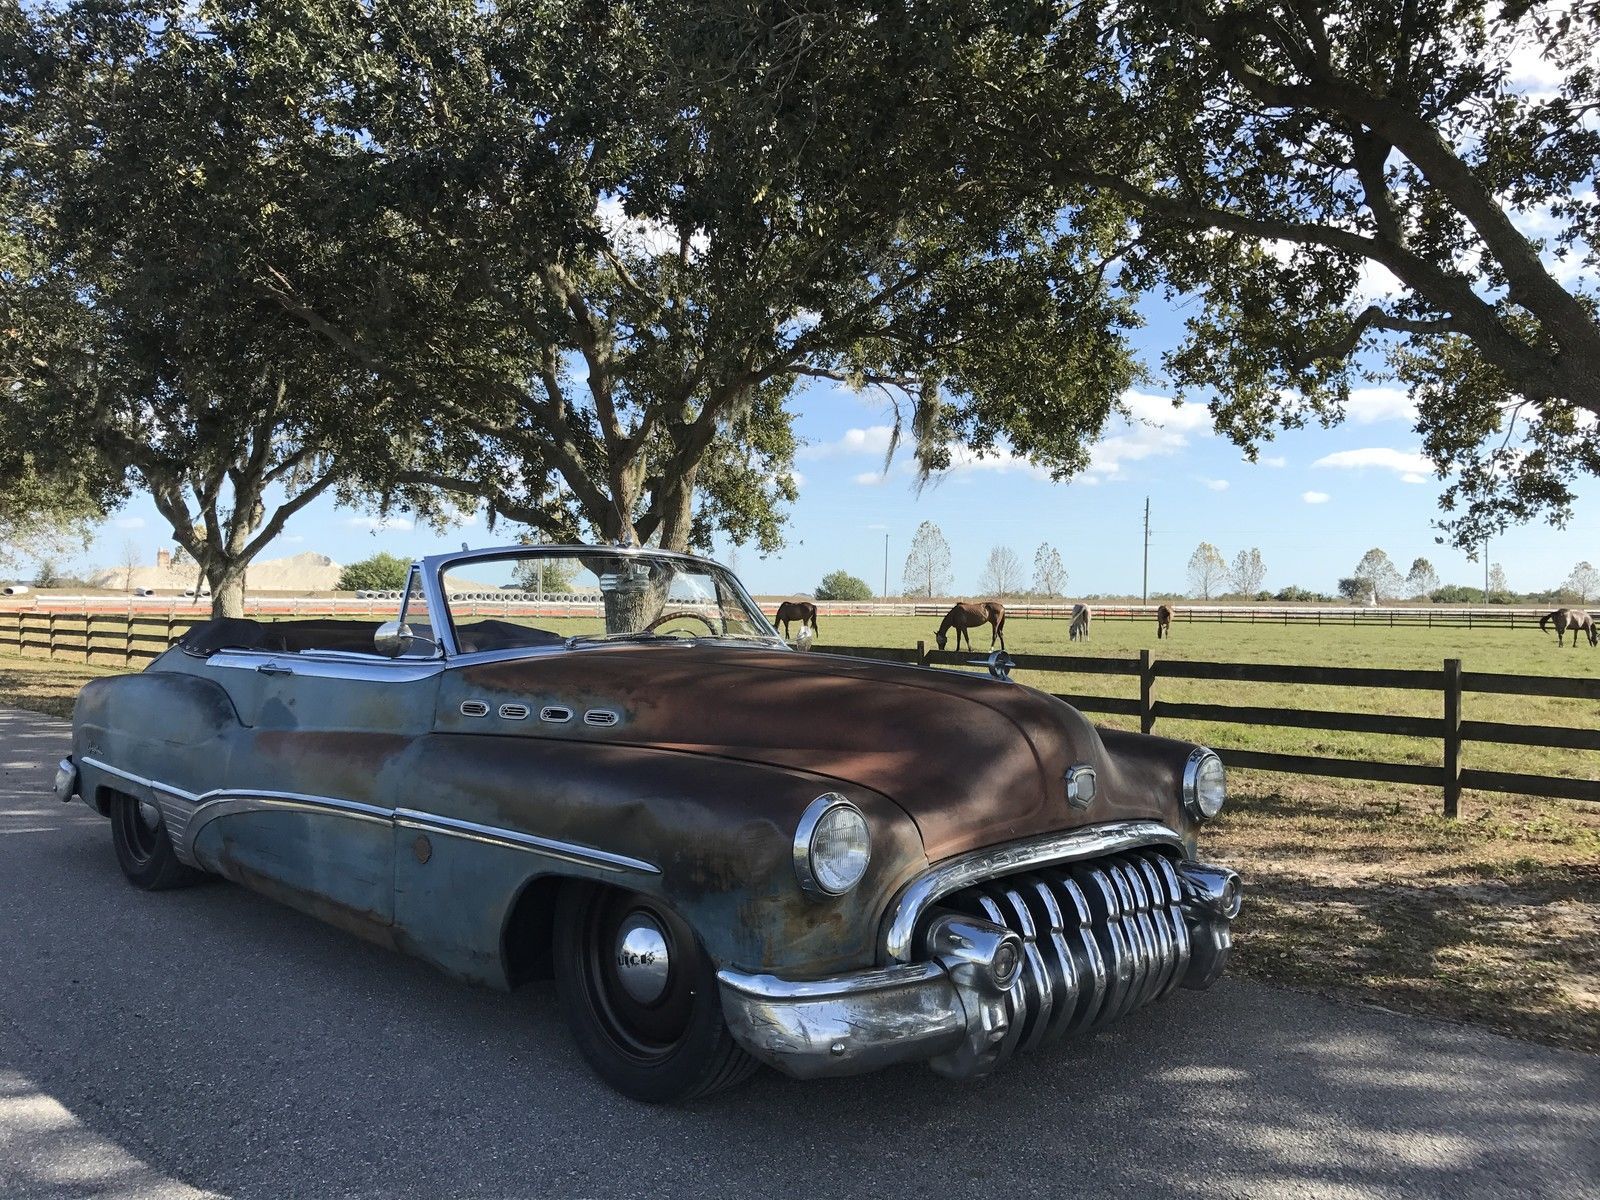 1950 buick super special you tube 2.37